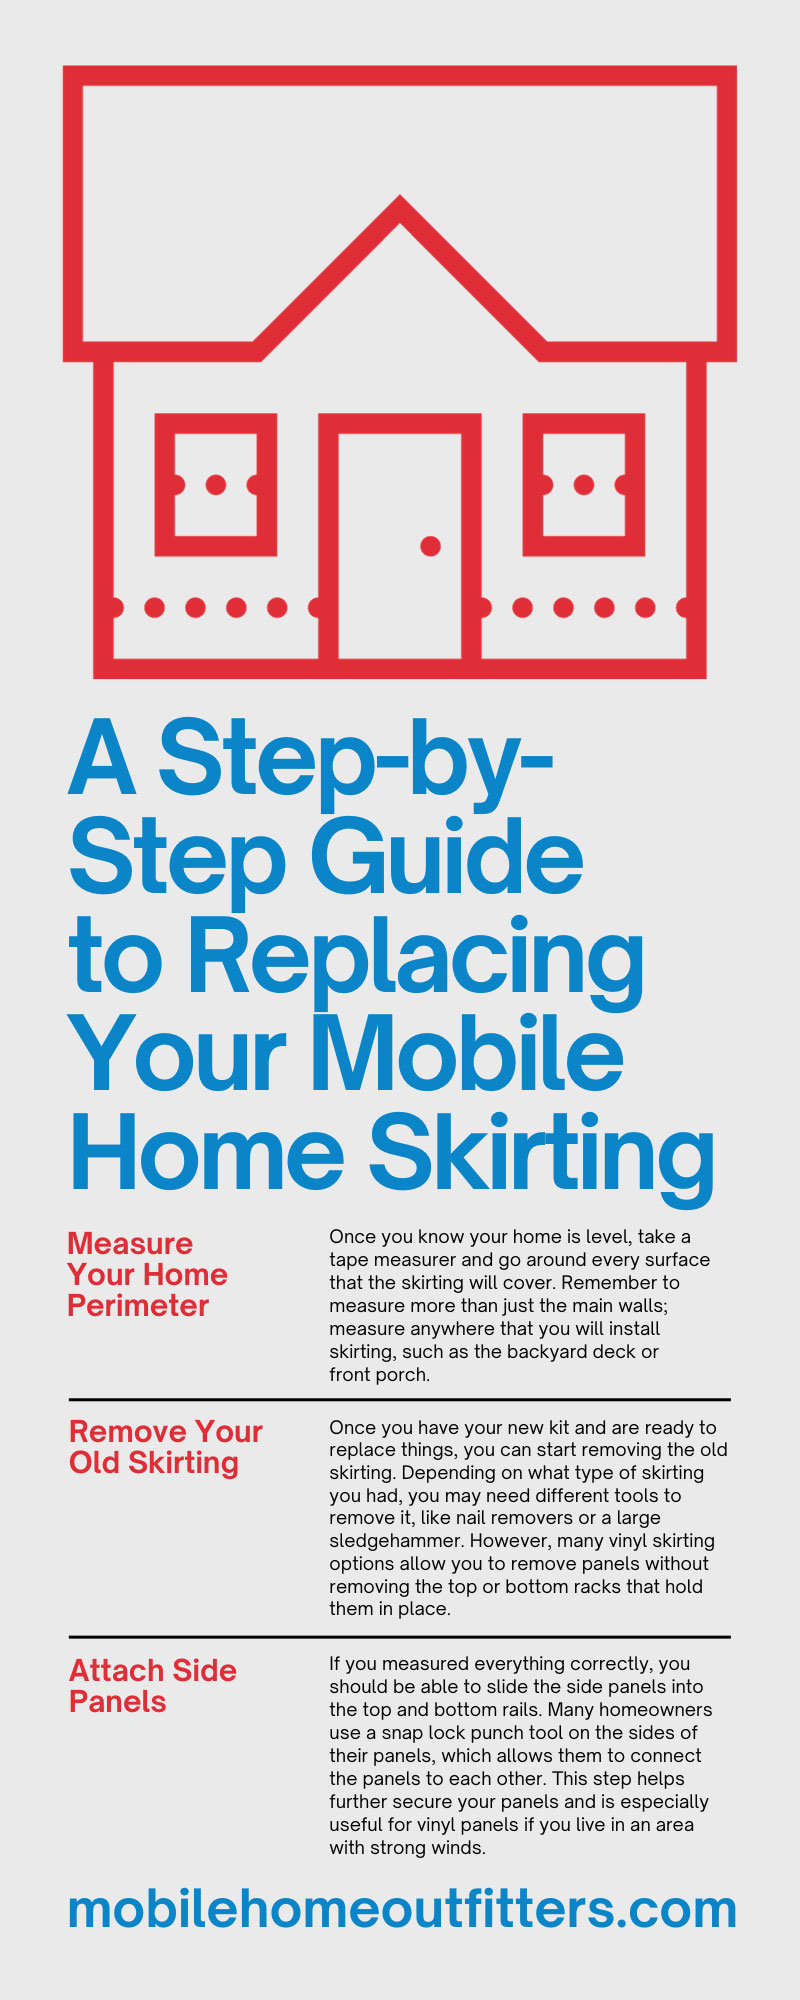 A Step-by-Step Guide to Replacing Your Mobile Home Skirting